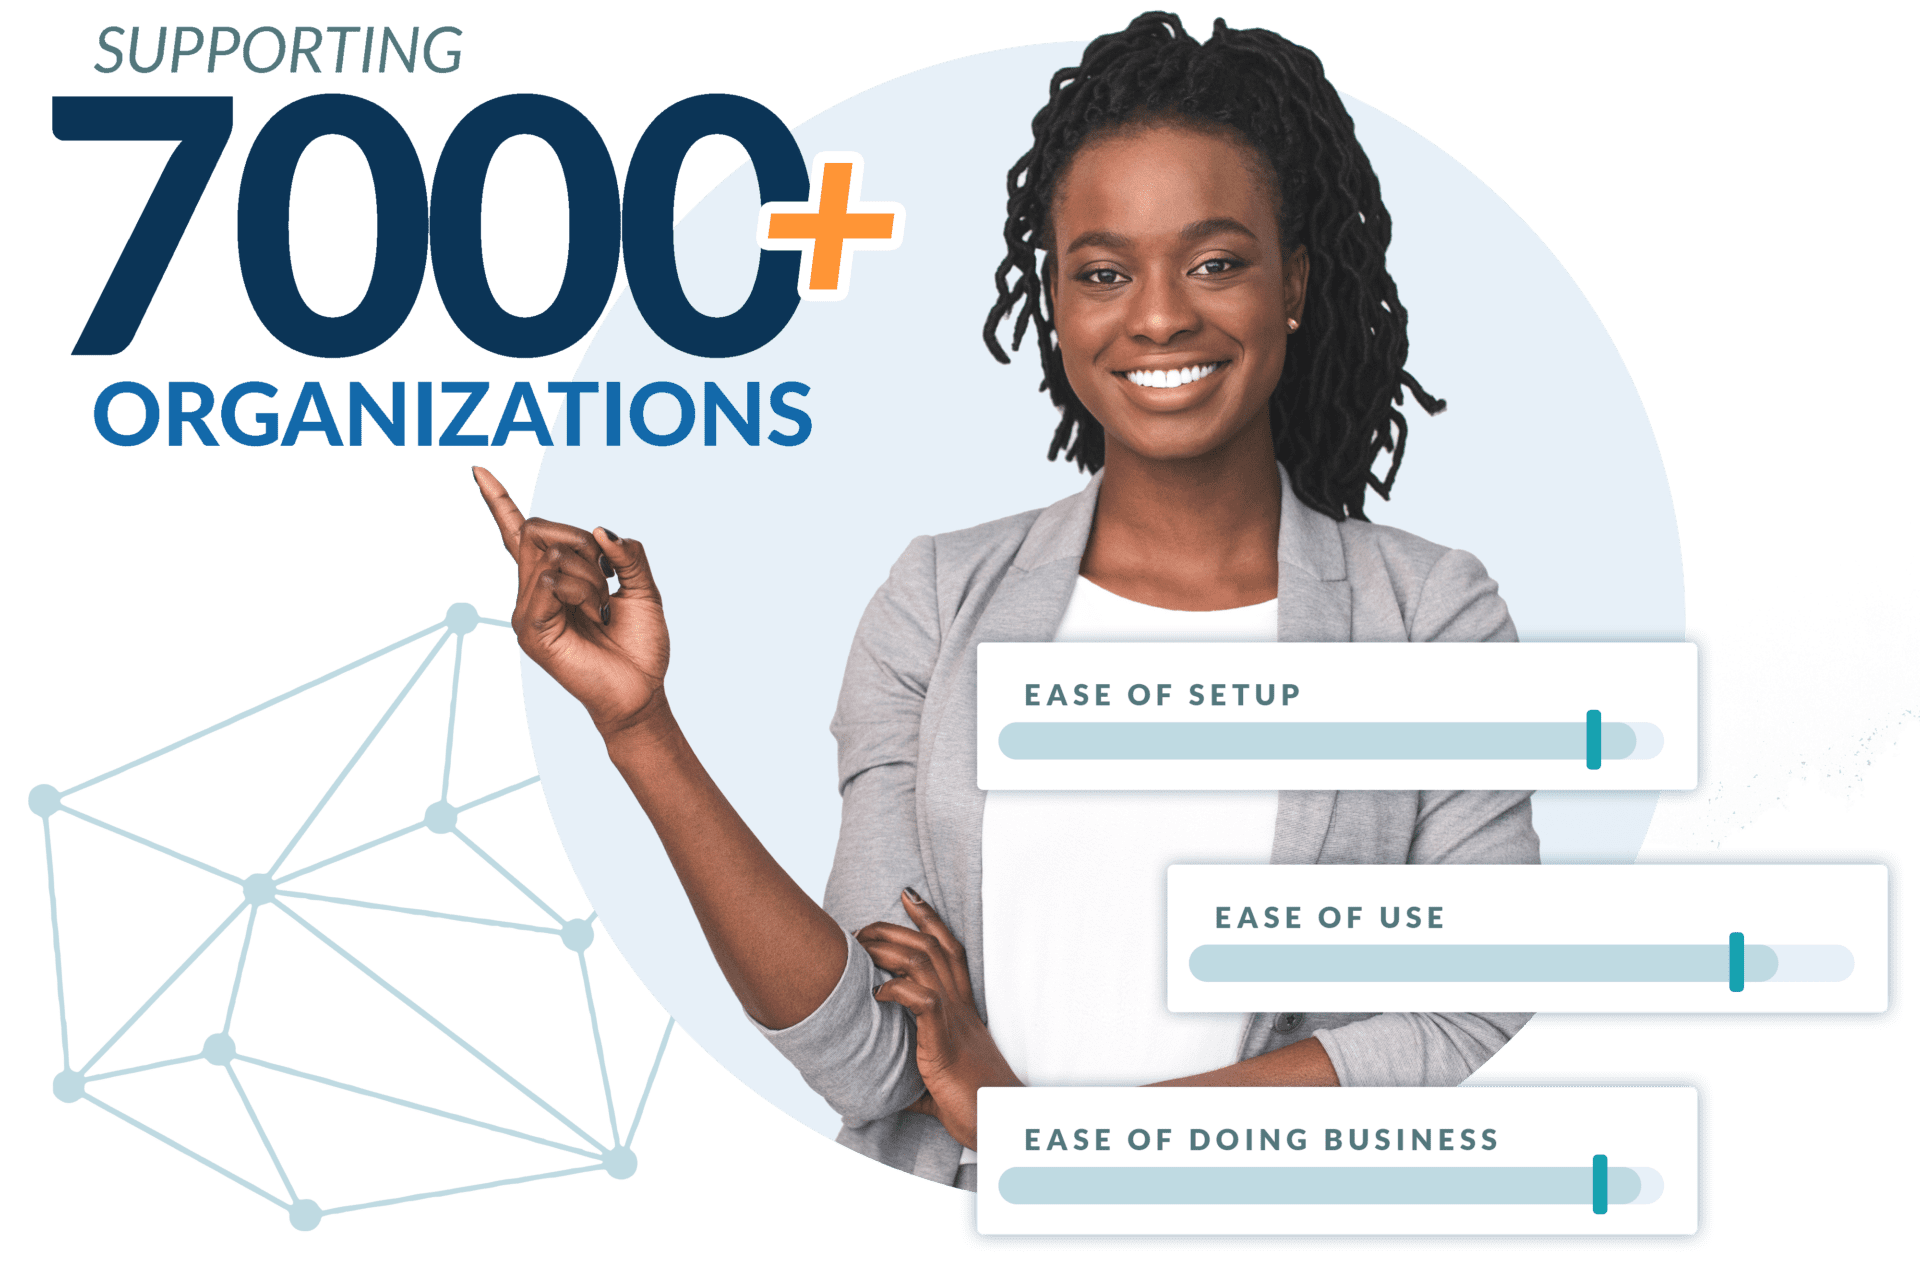 Supporting 7000 Organizations